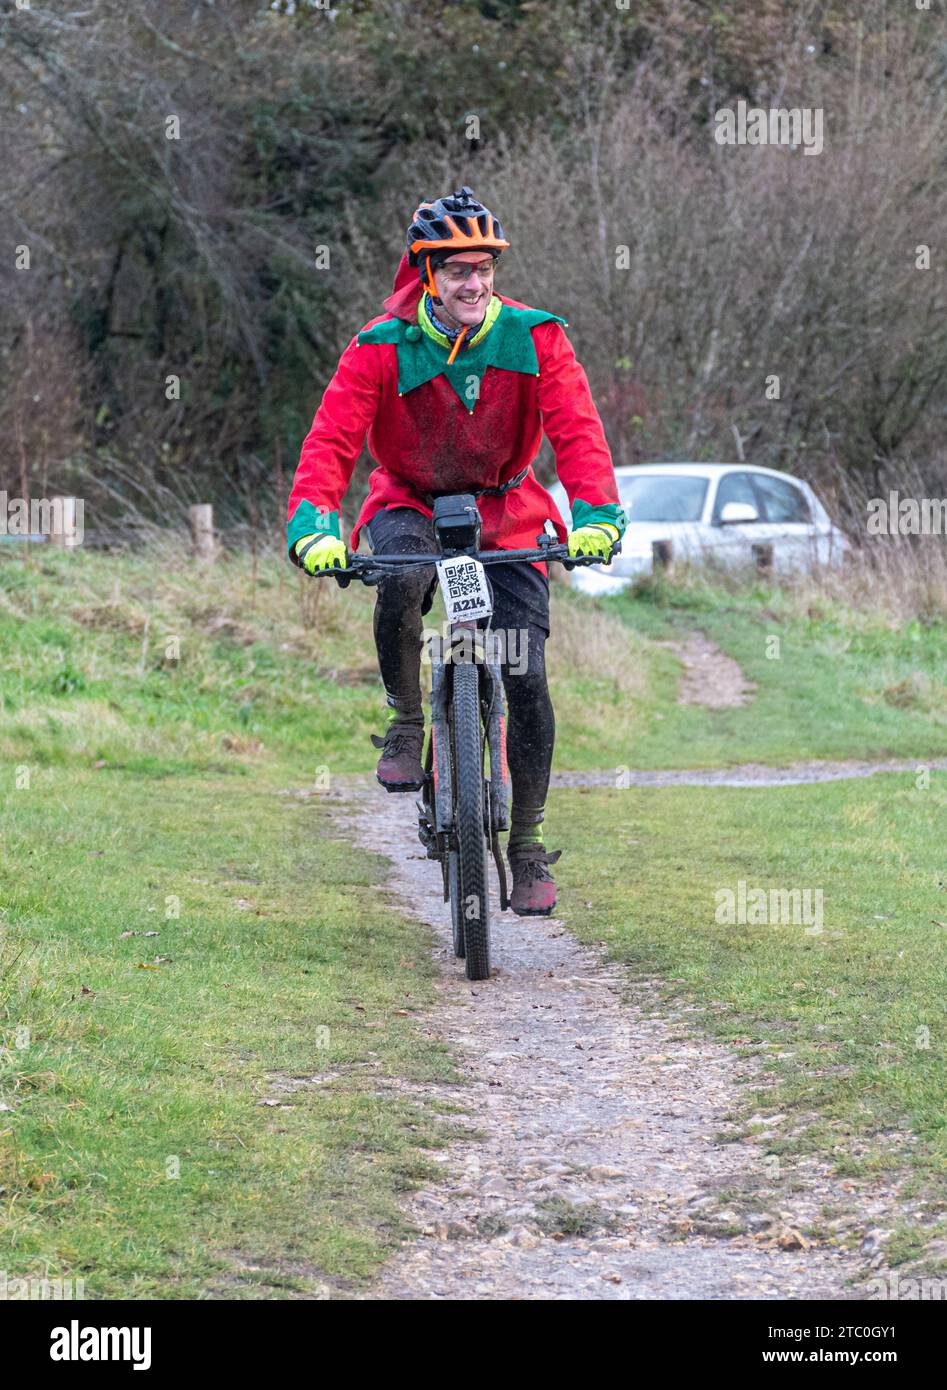 9th December 2023. Competitors riding their mountain bikes in the Dirty Santa MTB trail cycling event in the Surrey Hills, England, UK. Many of the cyclists were in Christmas themed fancy dress costumes, and were getting very muddy on the off-road route through the Surrey Hills Area of Outstanding Natural Beauty. Stock Photo